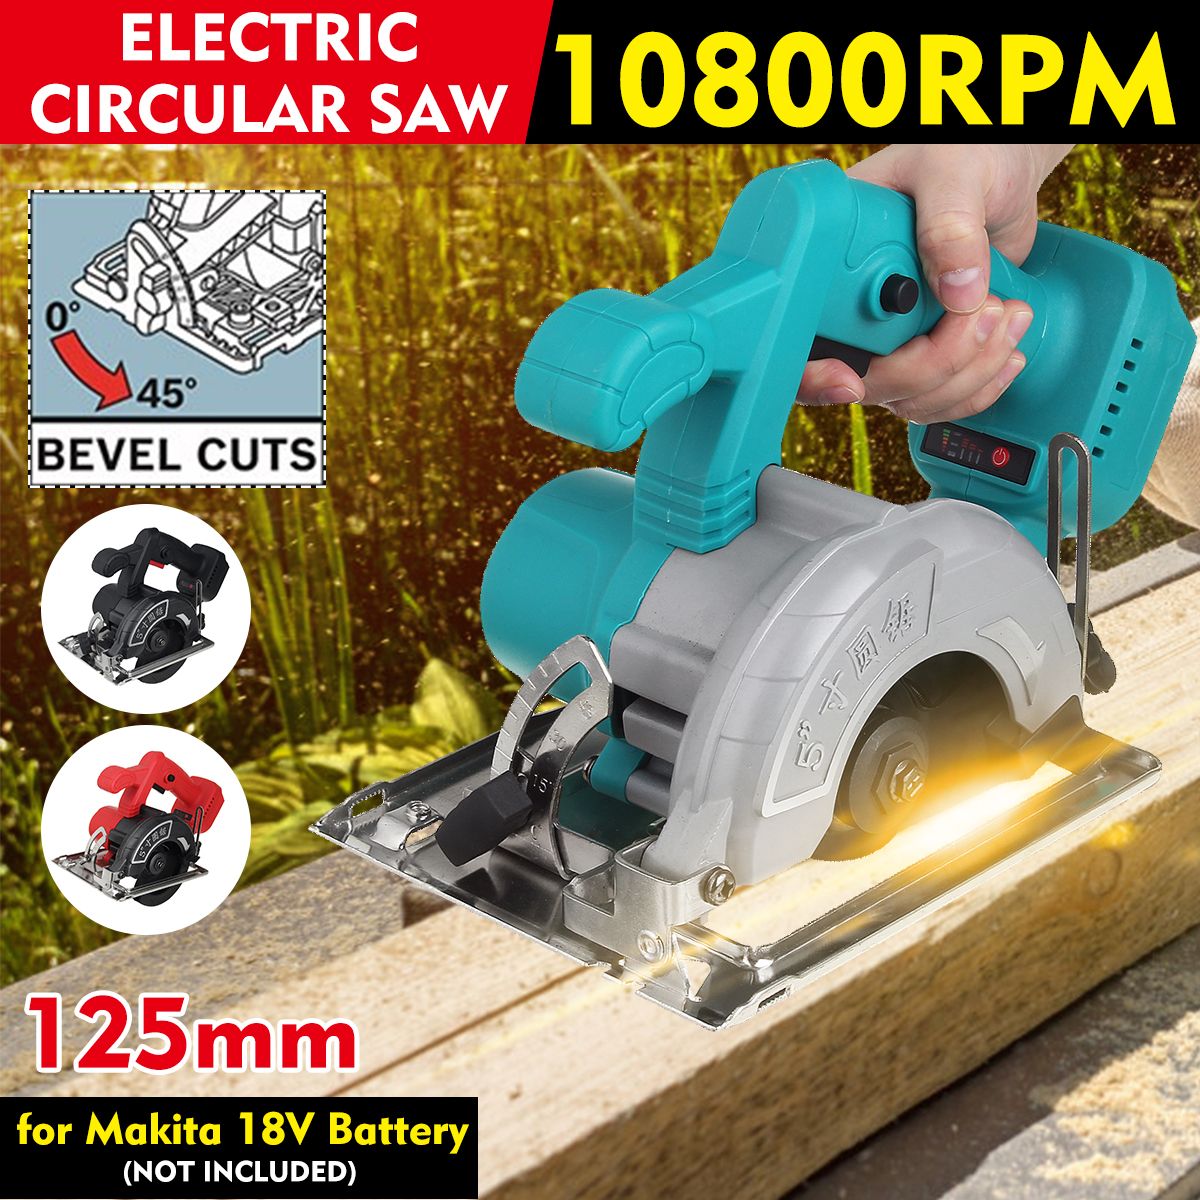 125mm-10800RPM-Multifunction-Circular-Saw-Scale-Bevel-Cutting-Power-Tools-For-18V-Makita-Battery-1759378